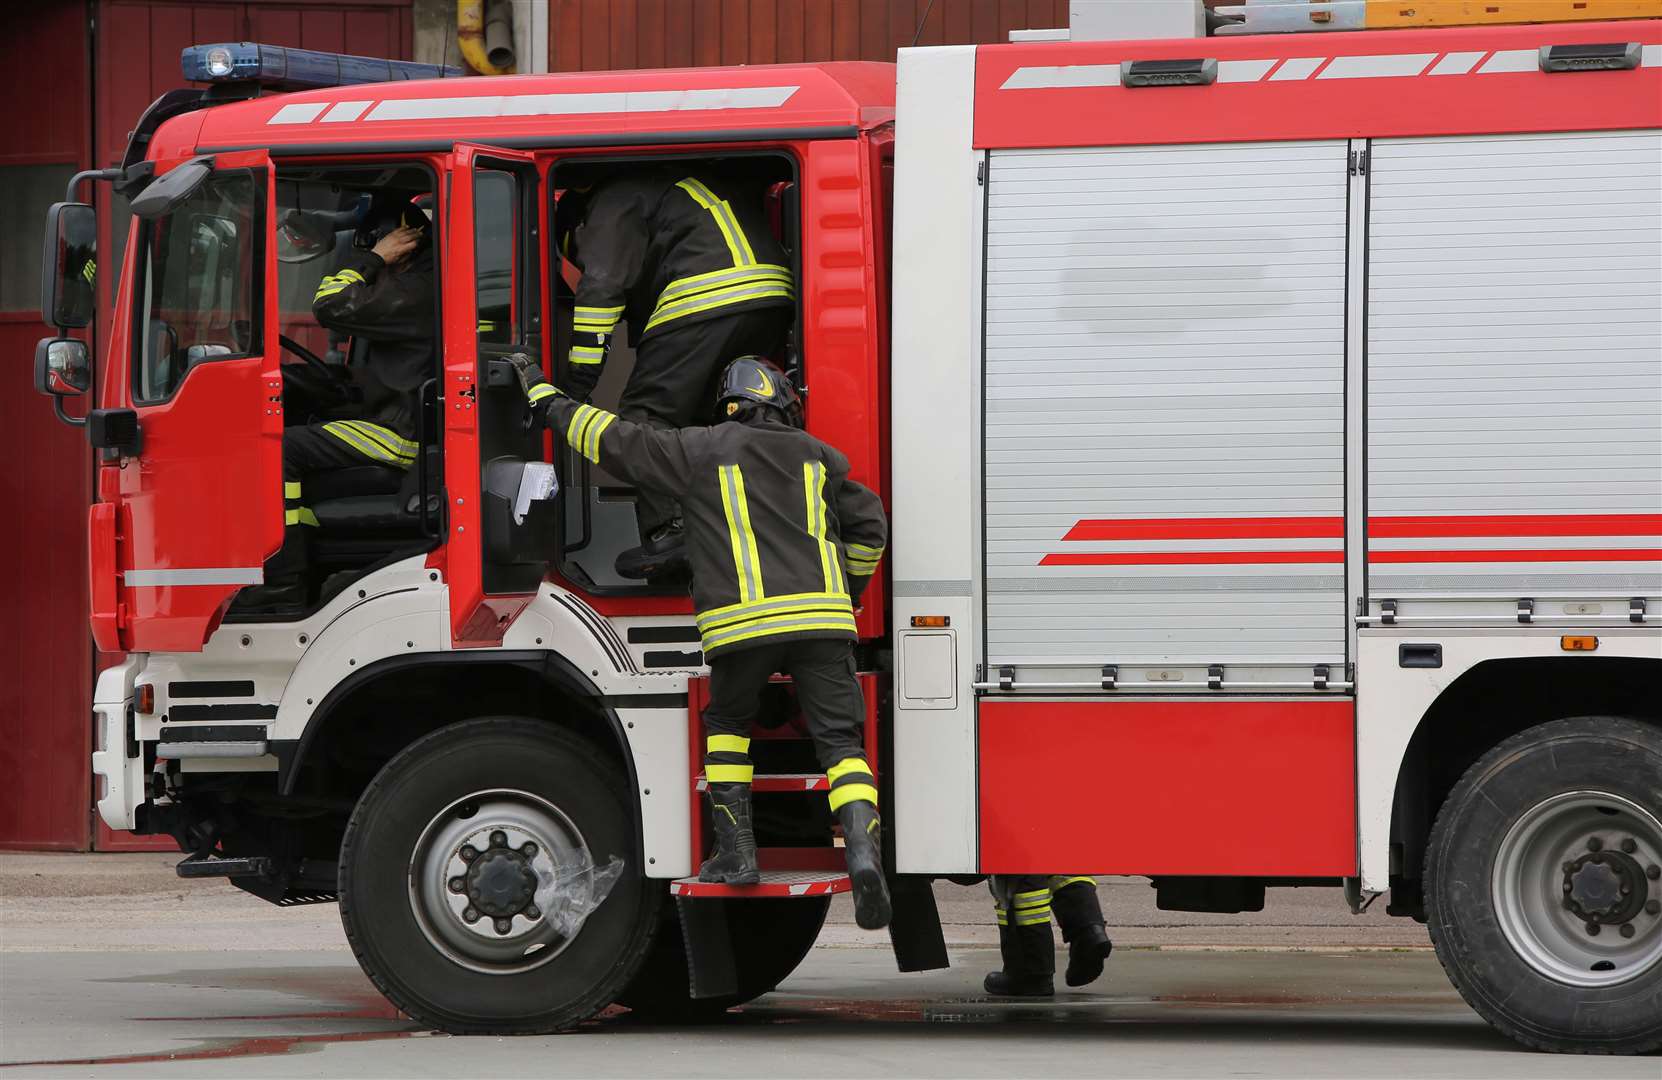 Firefighters will attend every emergency, says Michael Humphrey